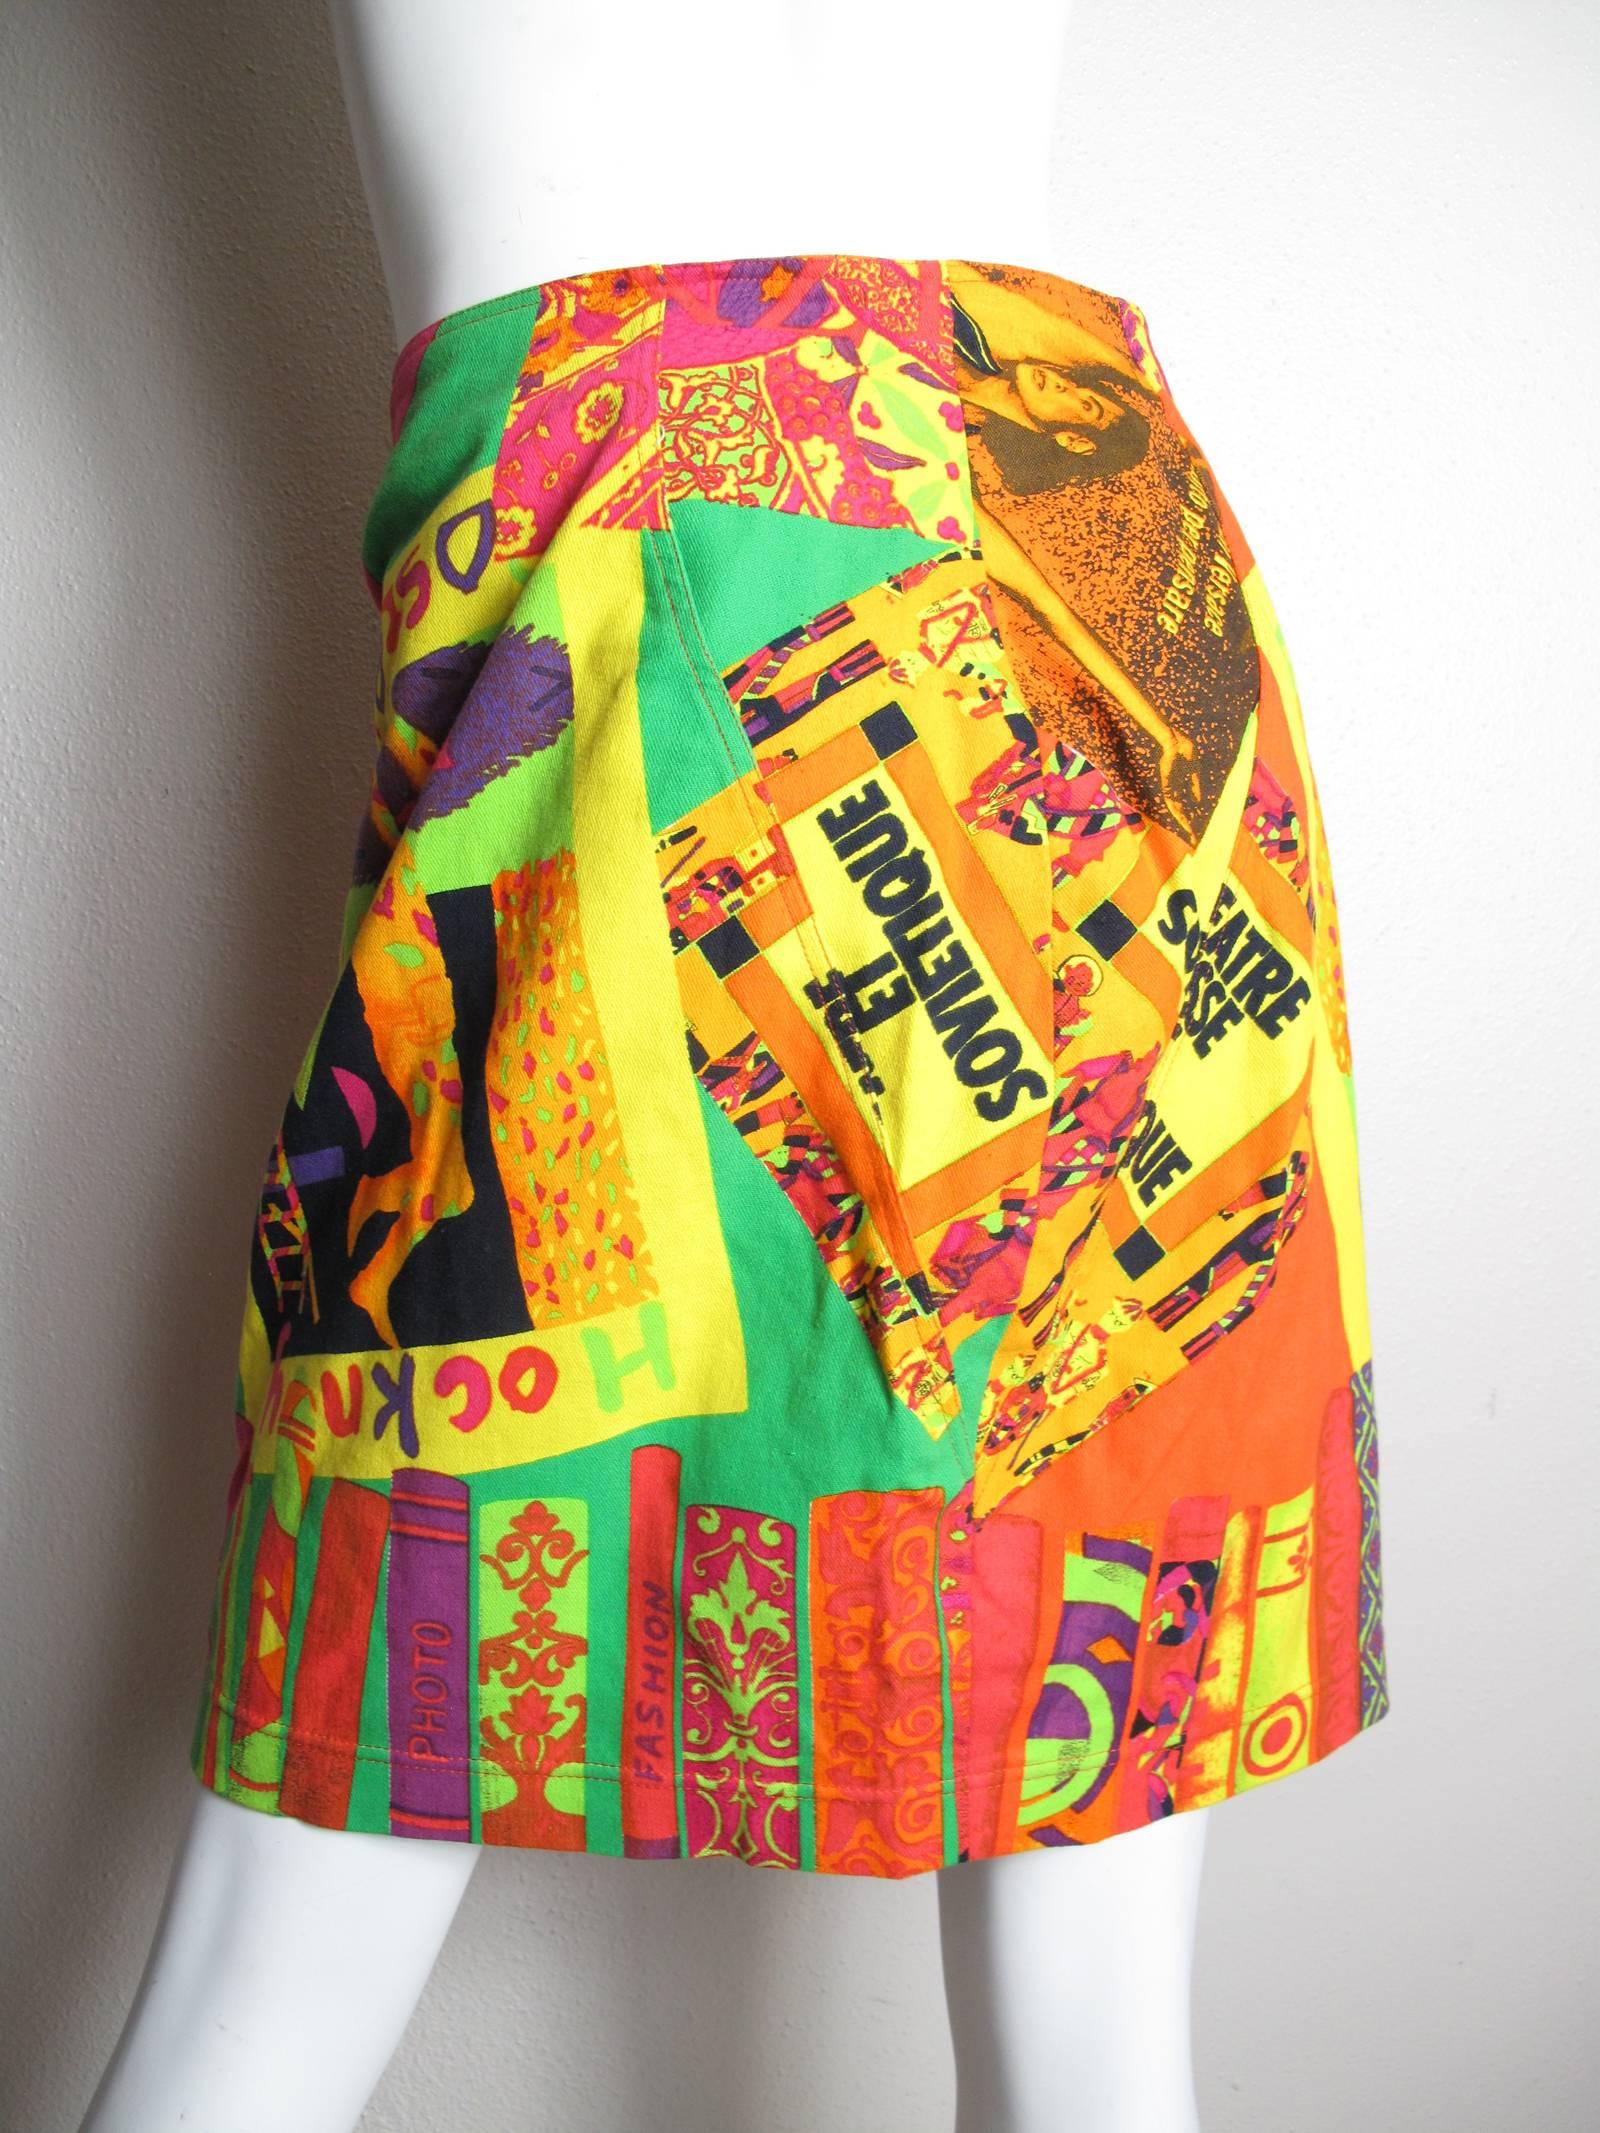 Istante Versace printed skirt.  Condition: Excellent. Cotton and elastic fabric.  Size 44. 

29